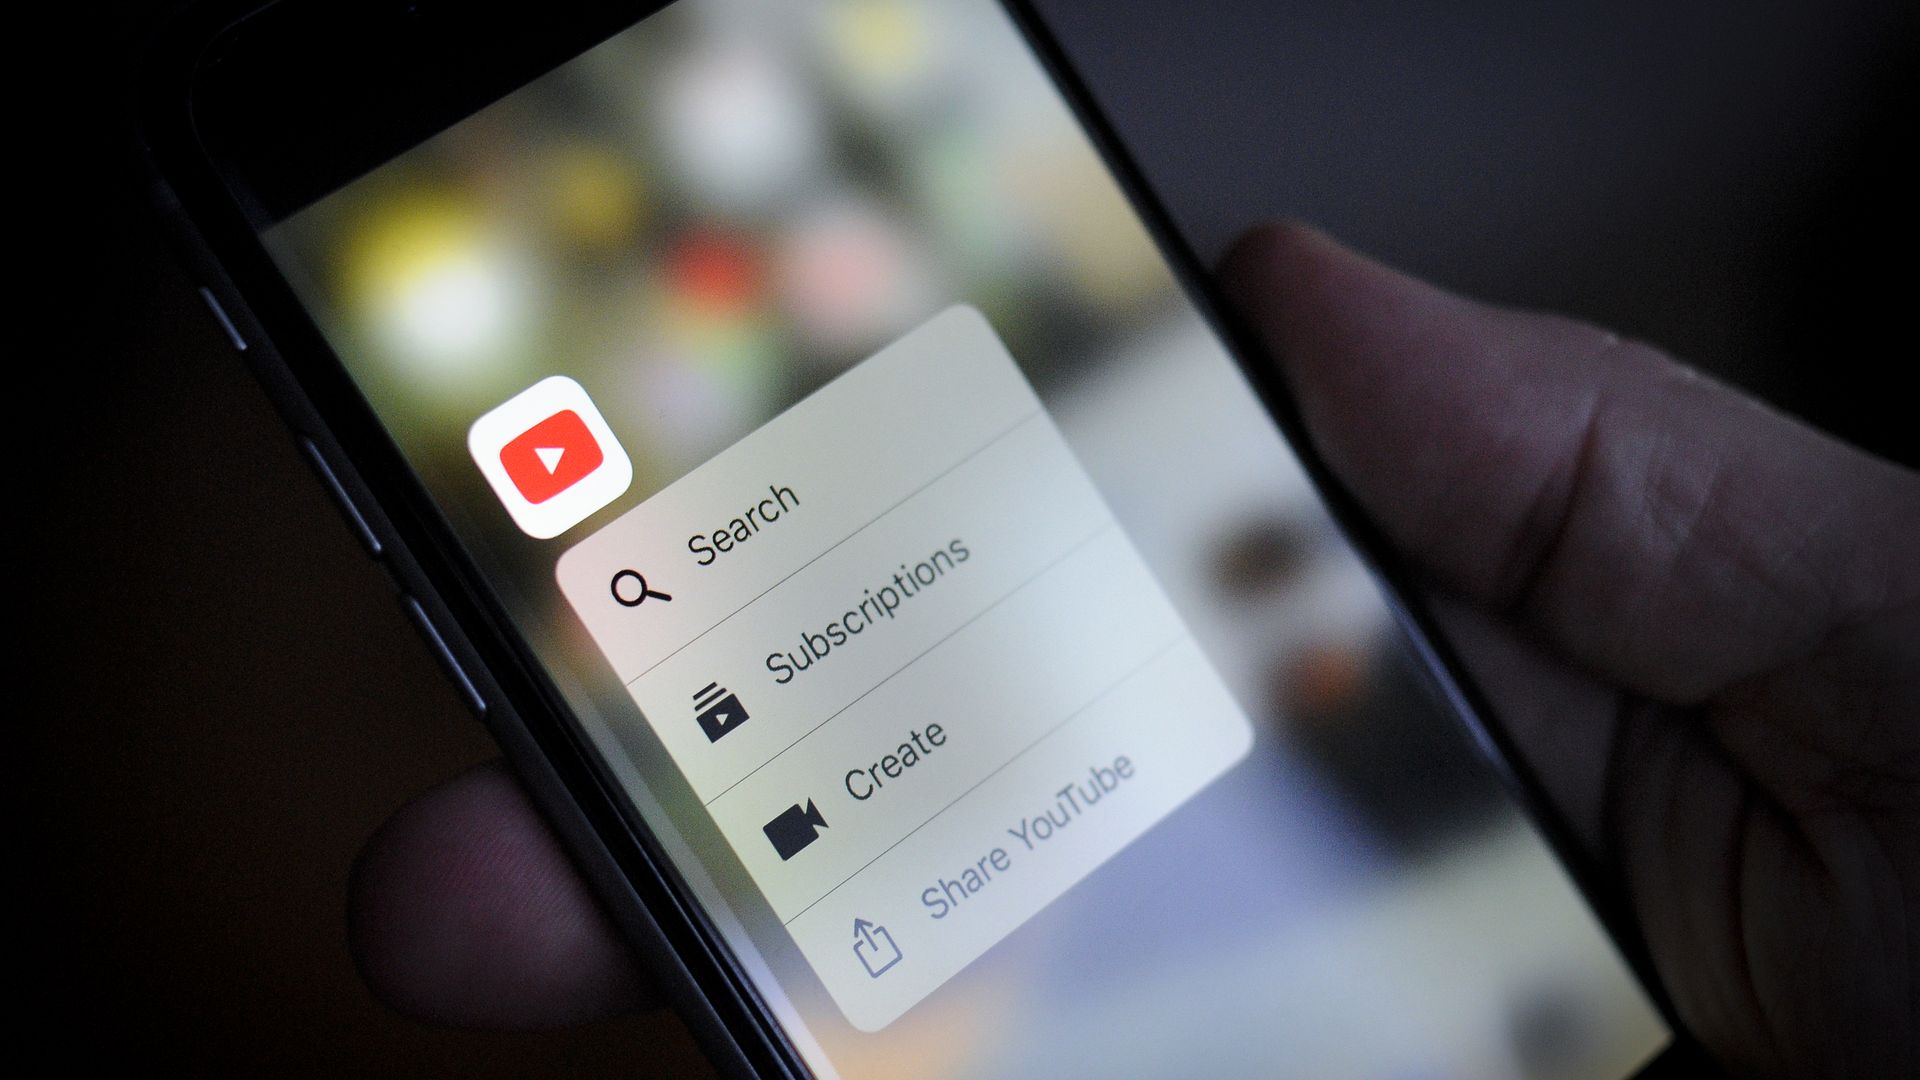 A user opens the YouTube app on a smartphone